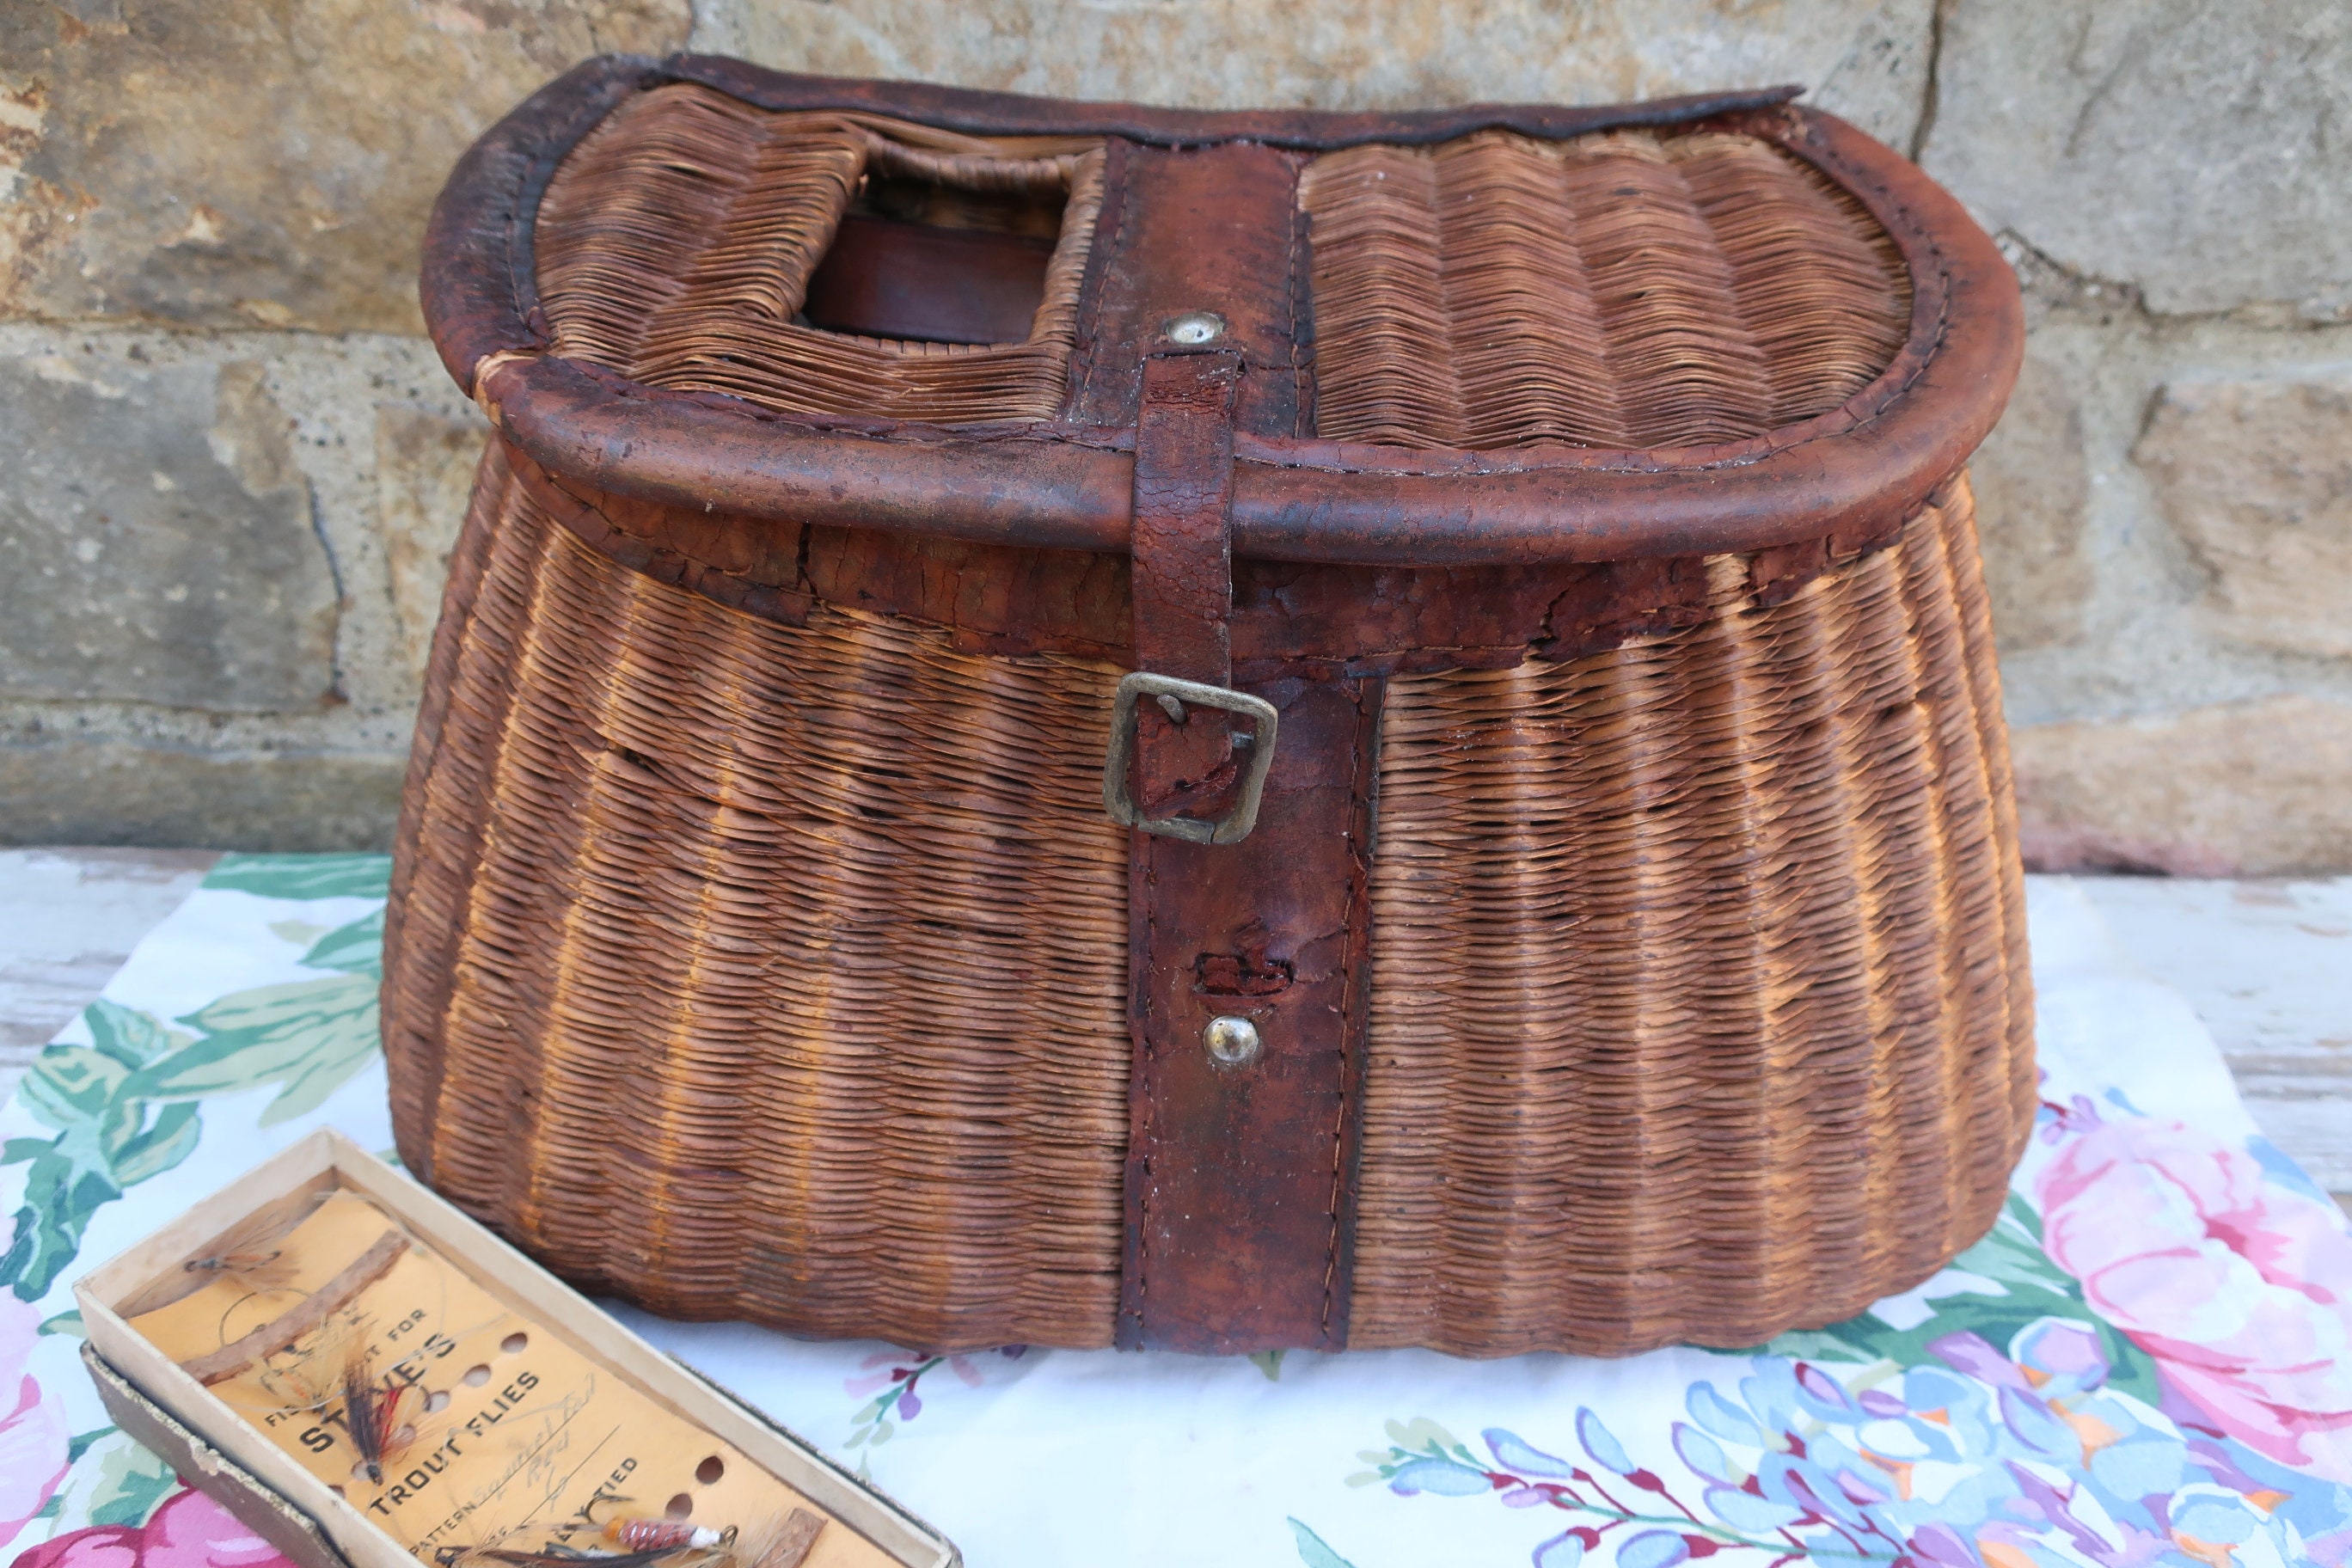 Vintage Fishing Creel / Fly Fishing Woven Rattan Wicker Basket with  Decorative Fish and Shoulder Strap